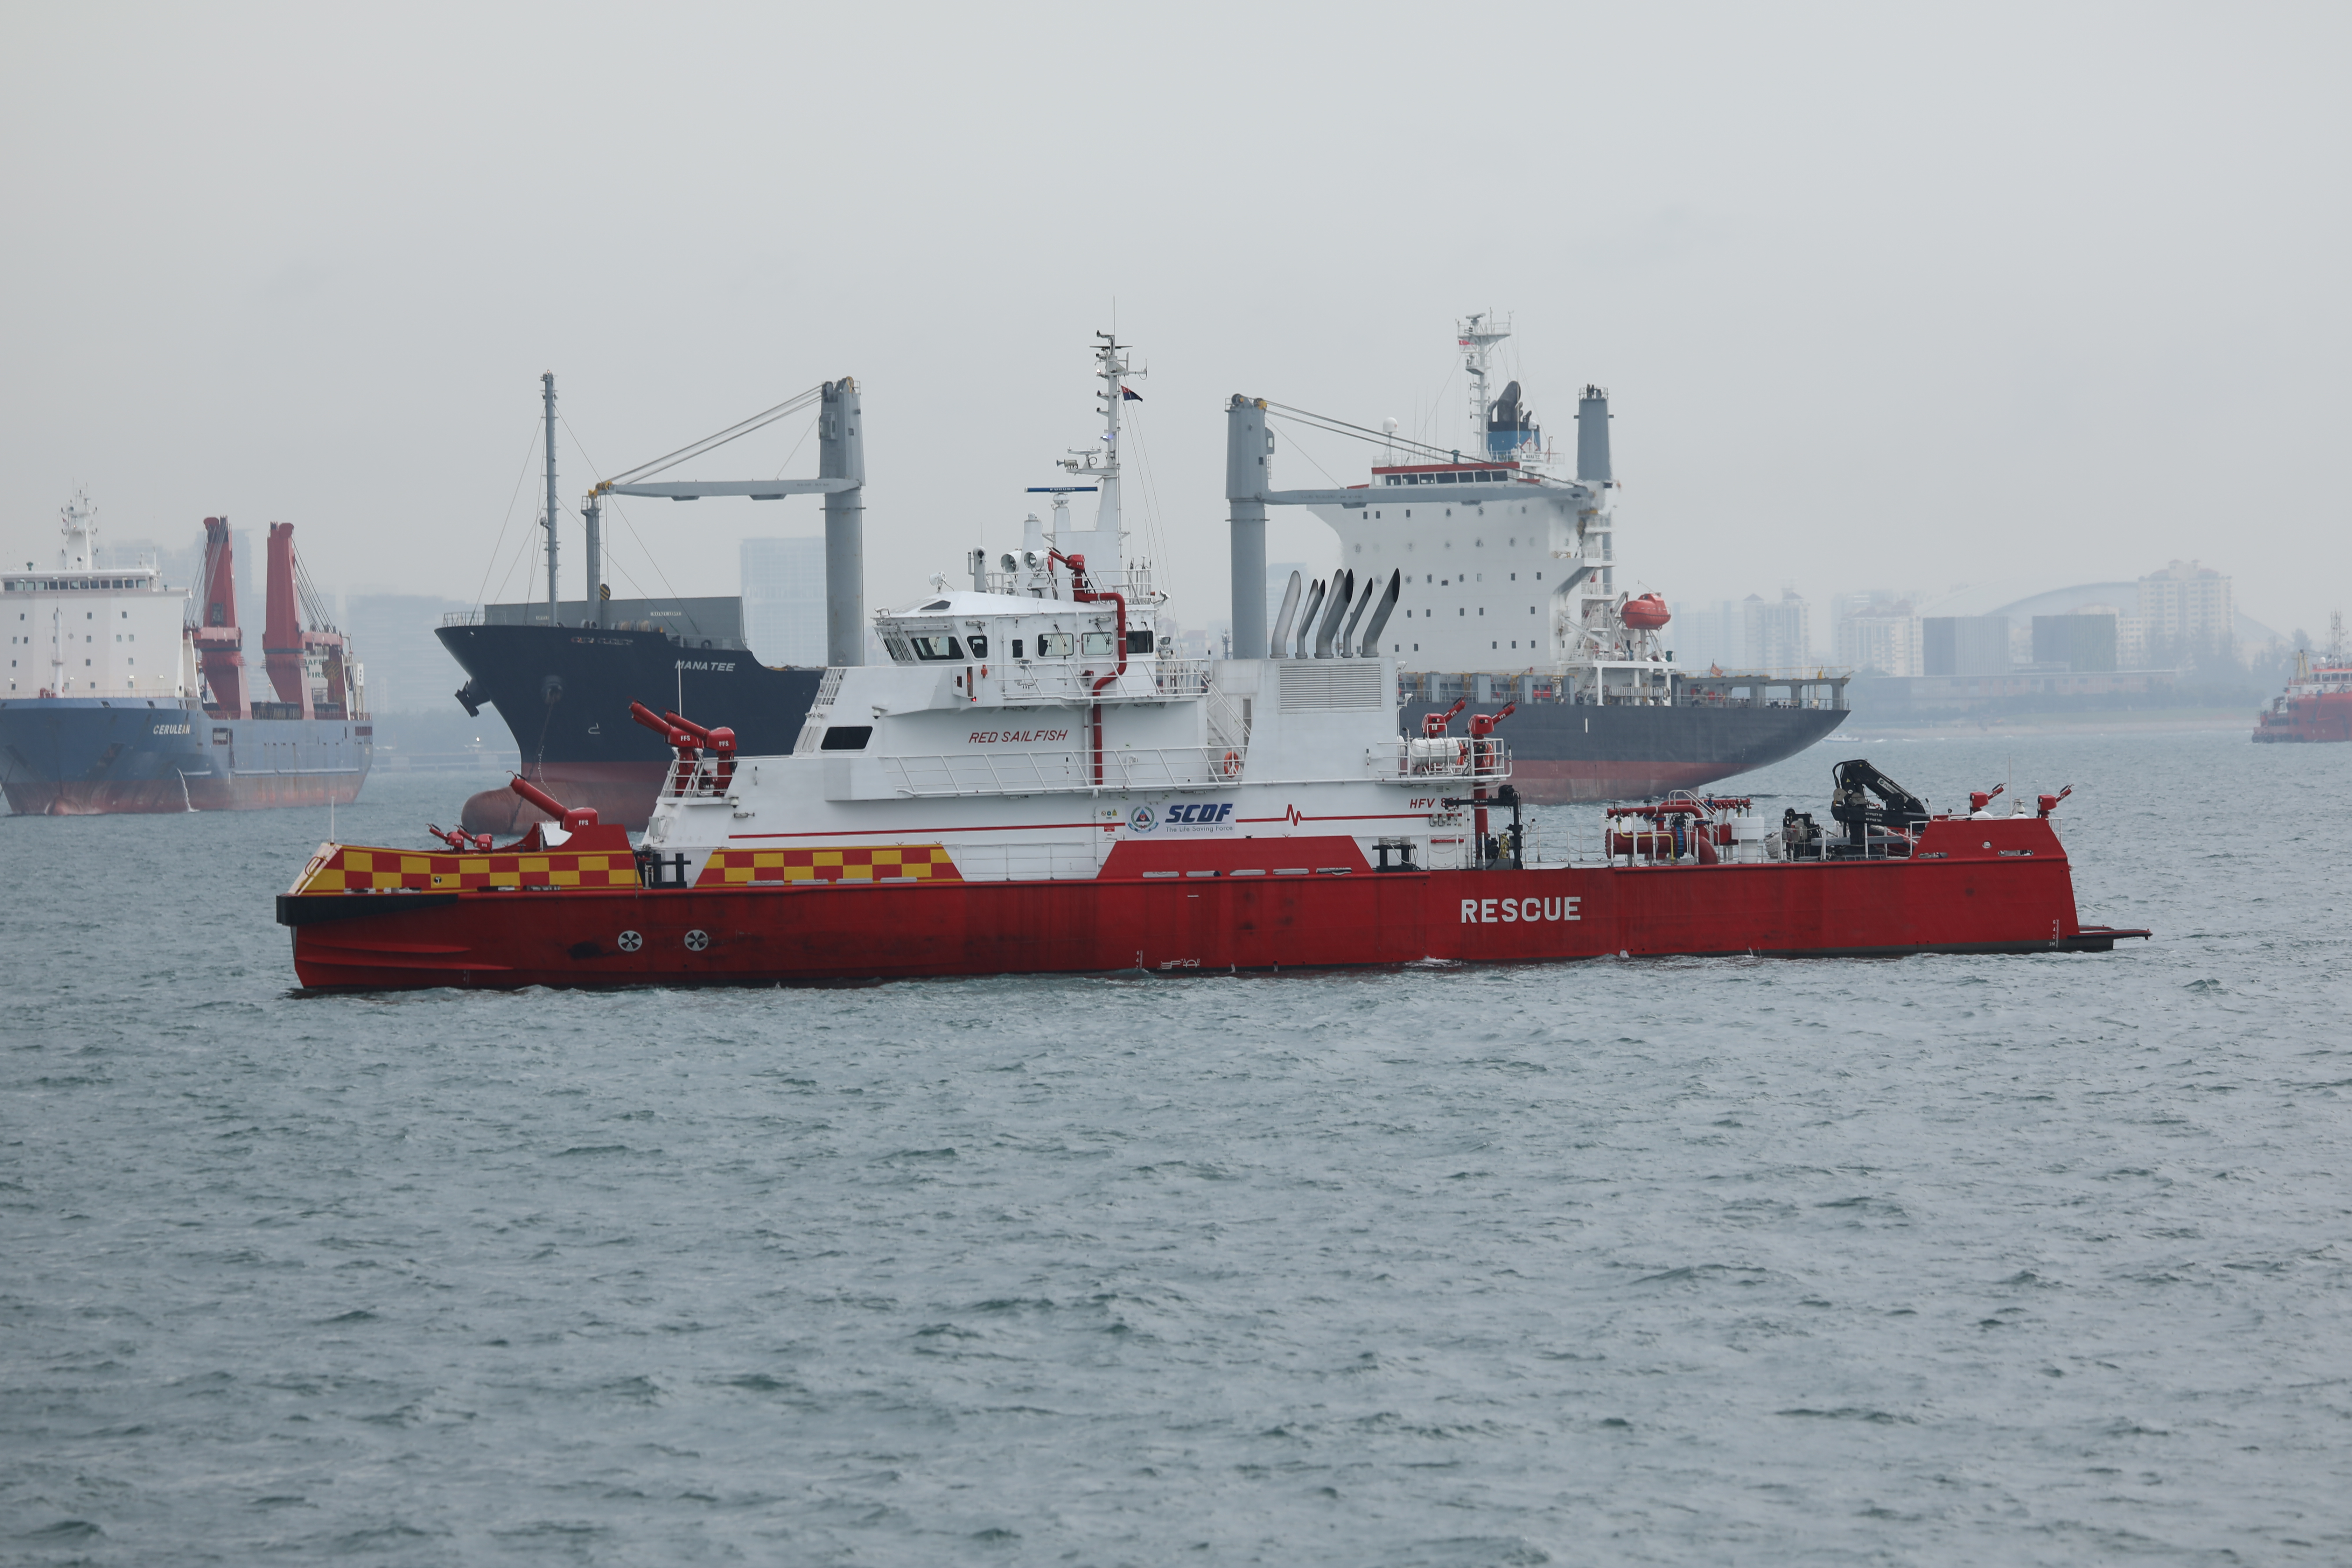 The Heavy Fire Vessel (HFV 821)/Red Sailfish at sea